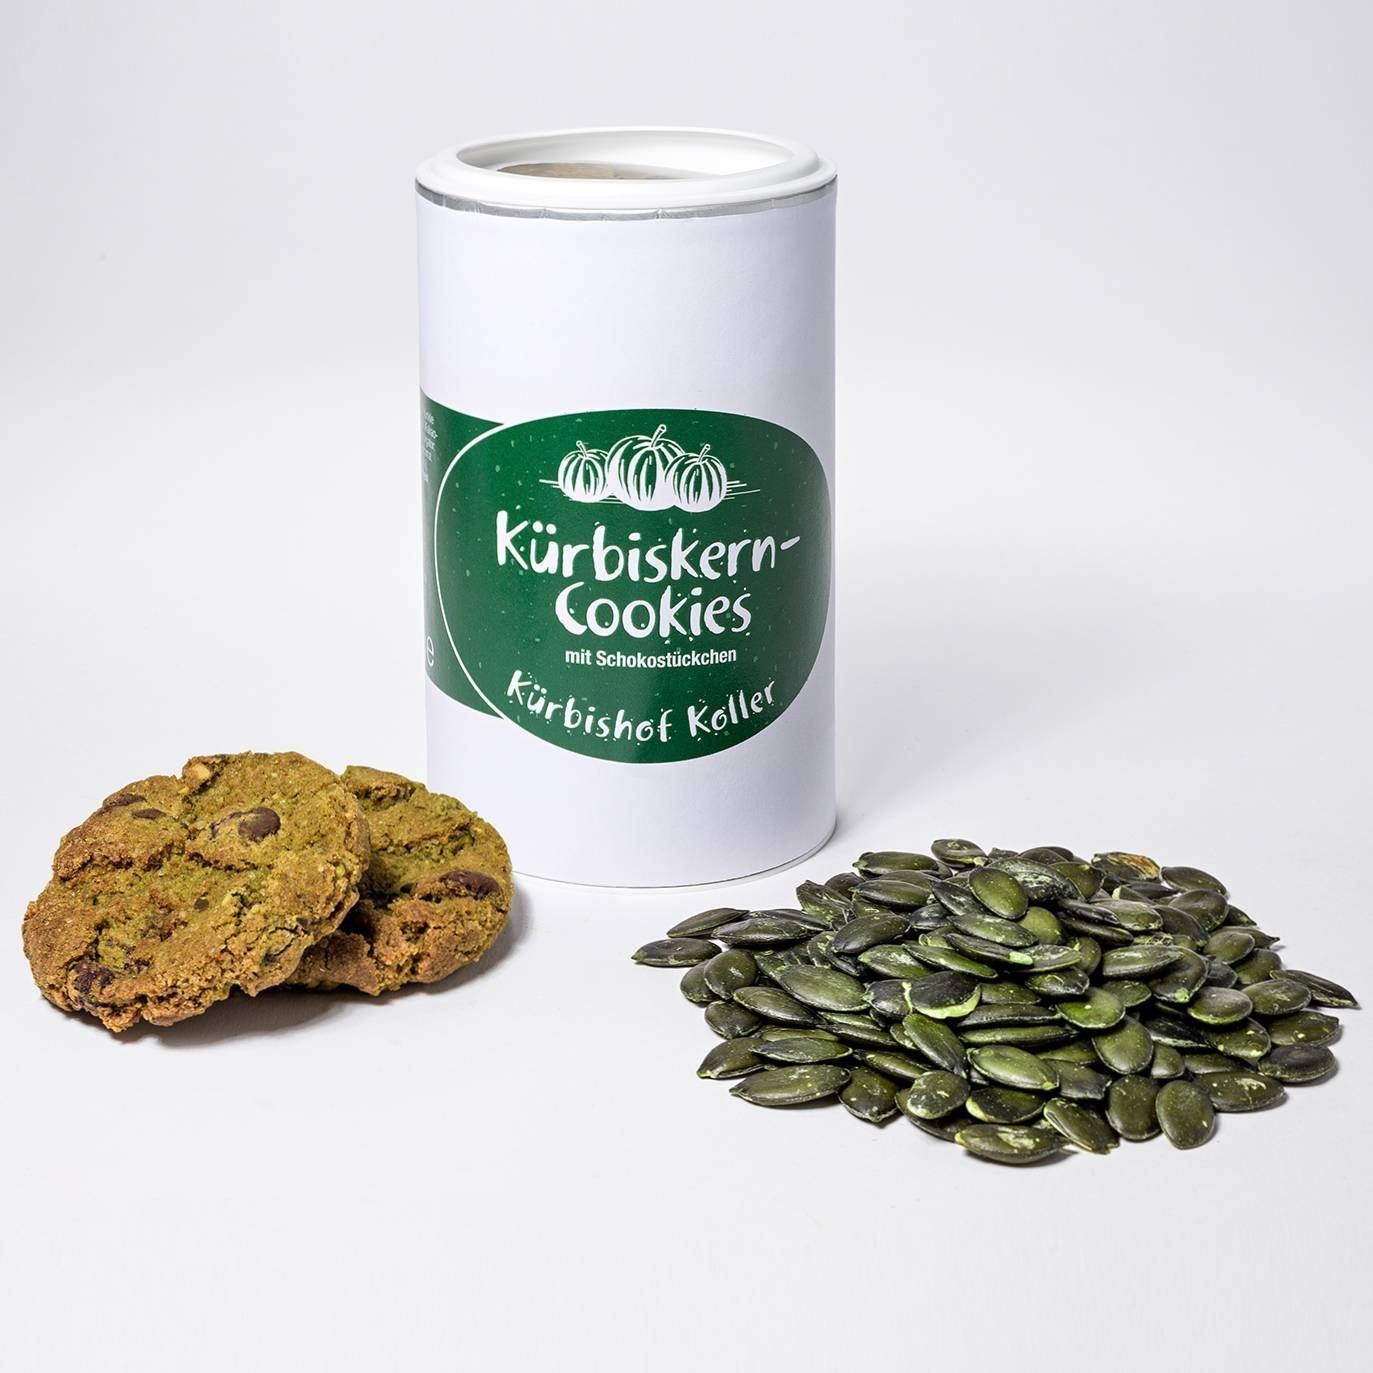 Pumpkin Seed Cookies with Chocolate Chips in Niger